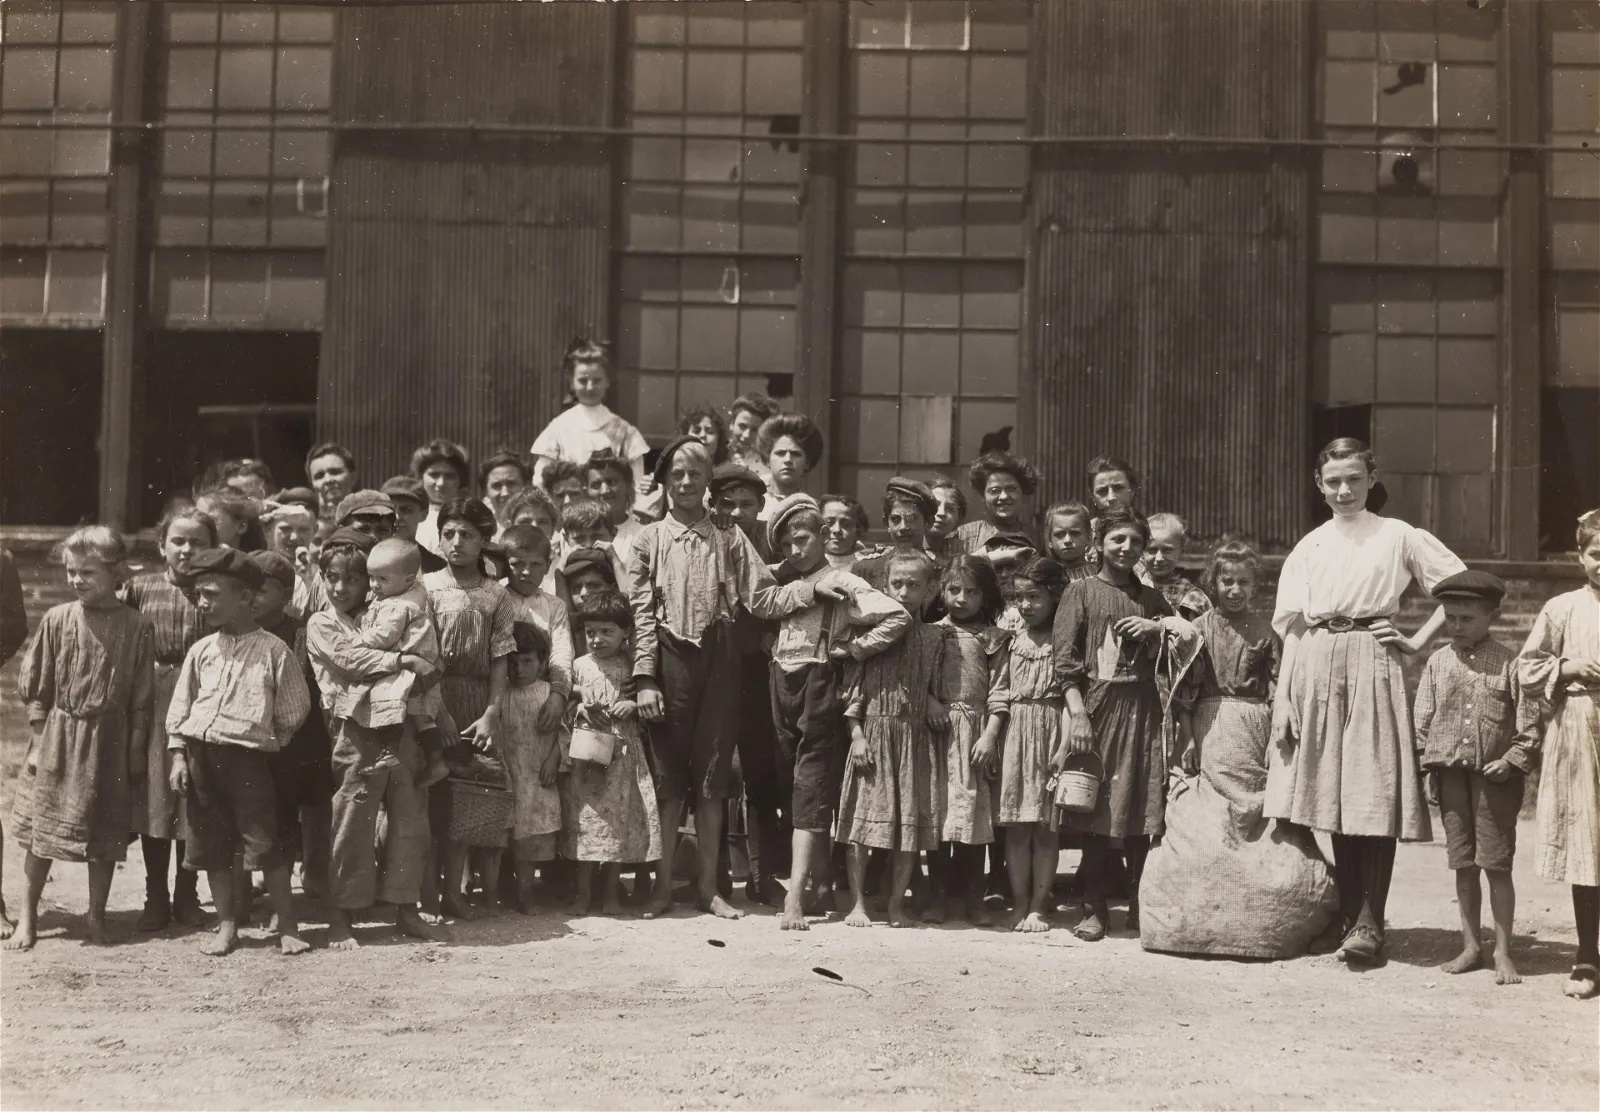 (7) Lewis Wickes Hine (1874-1940) Photographs - Image 5 of 15